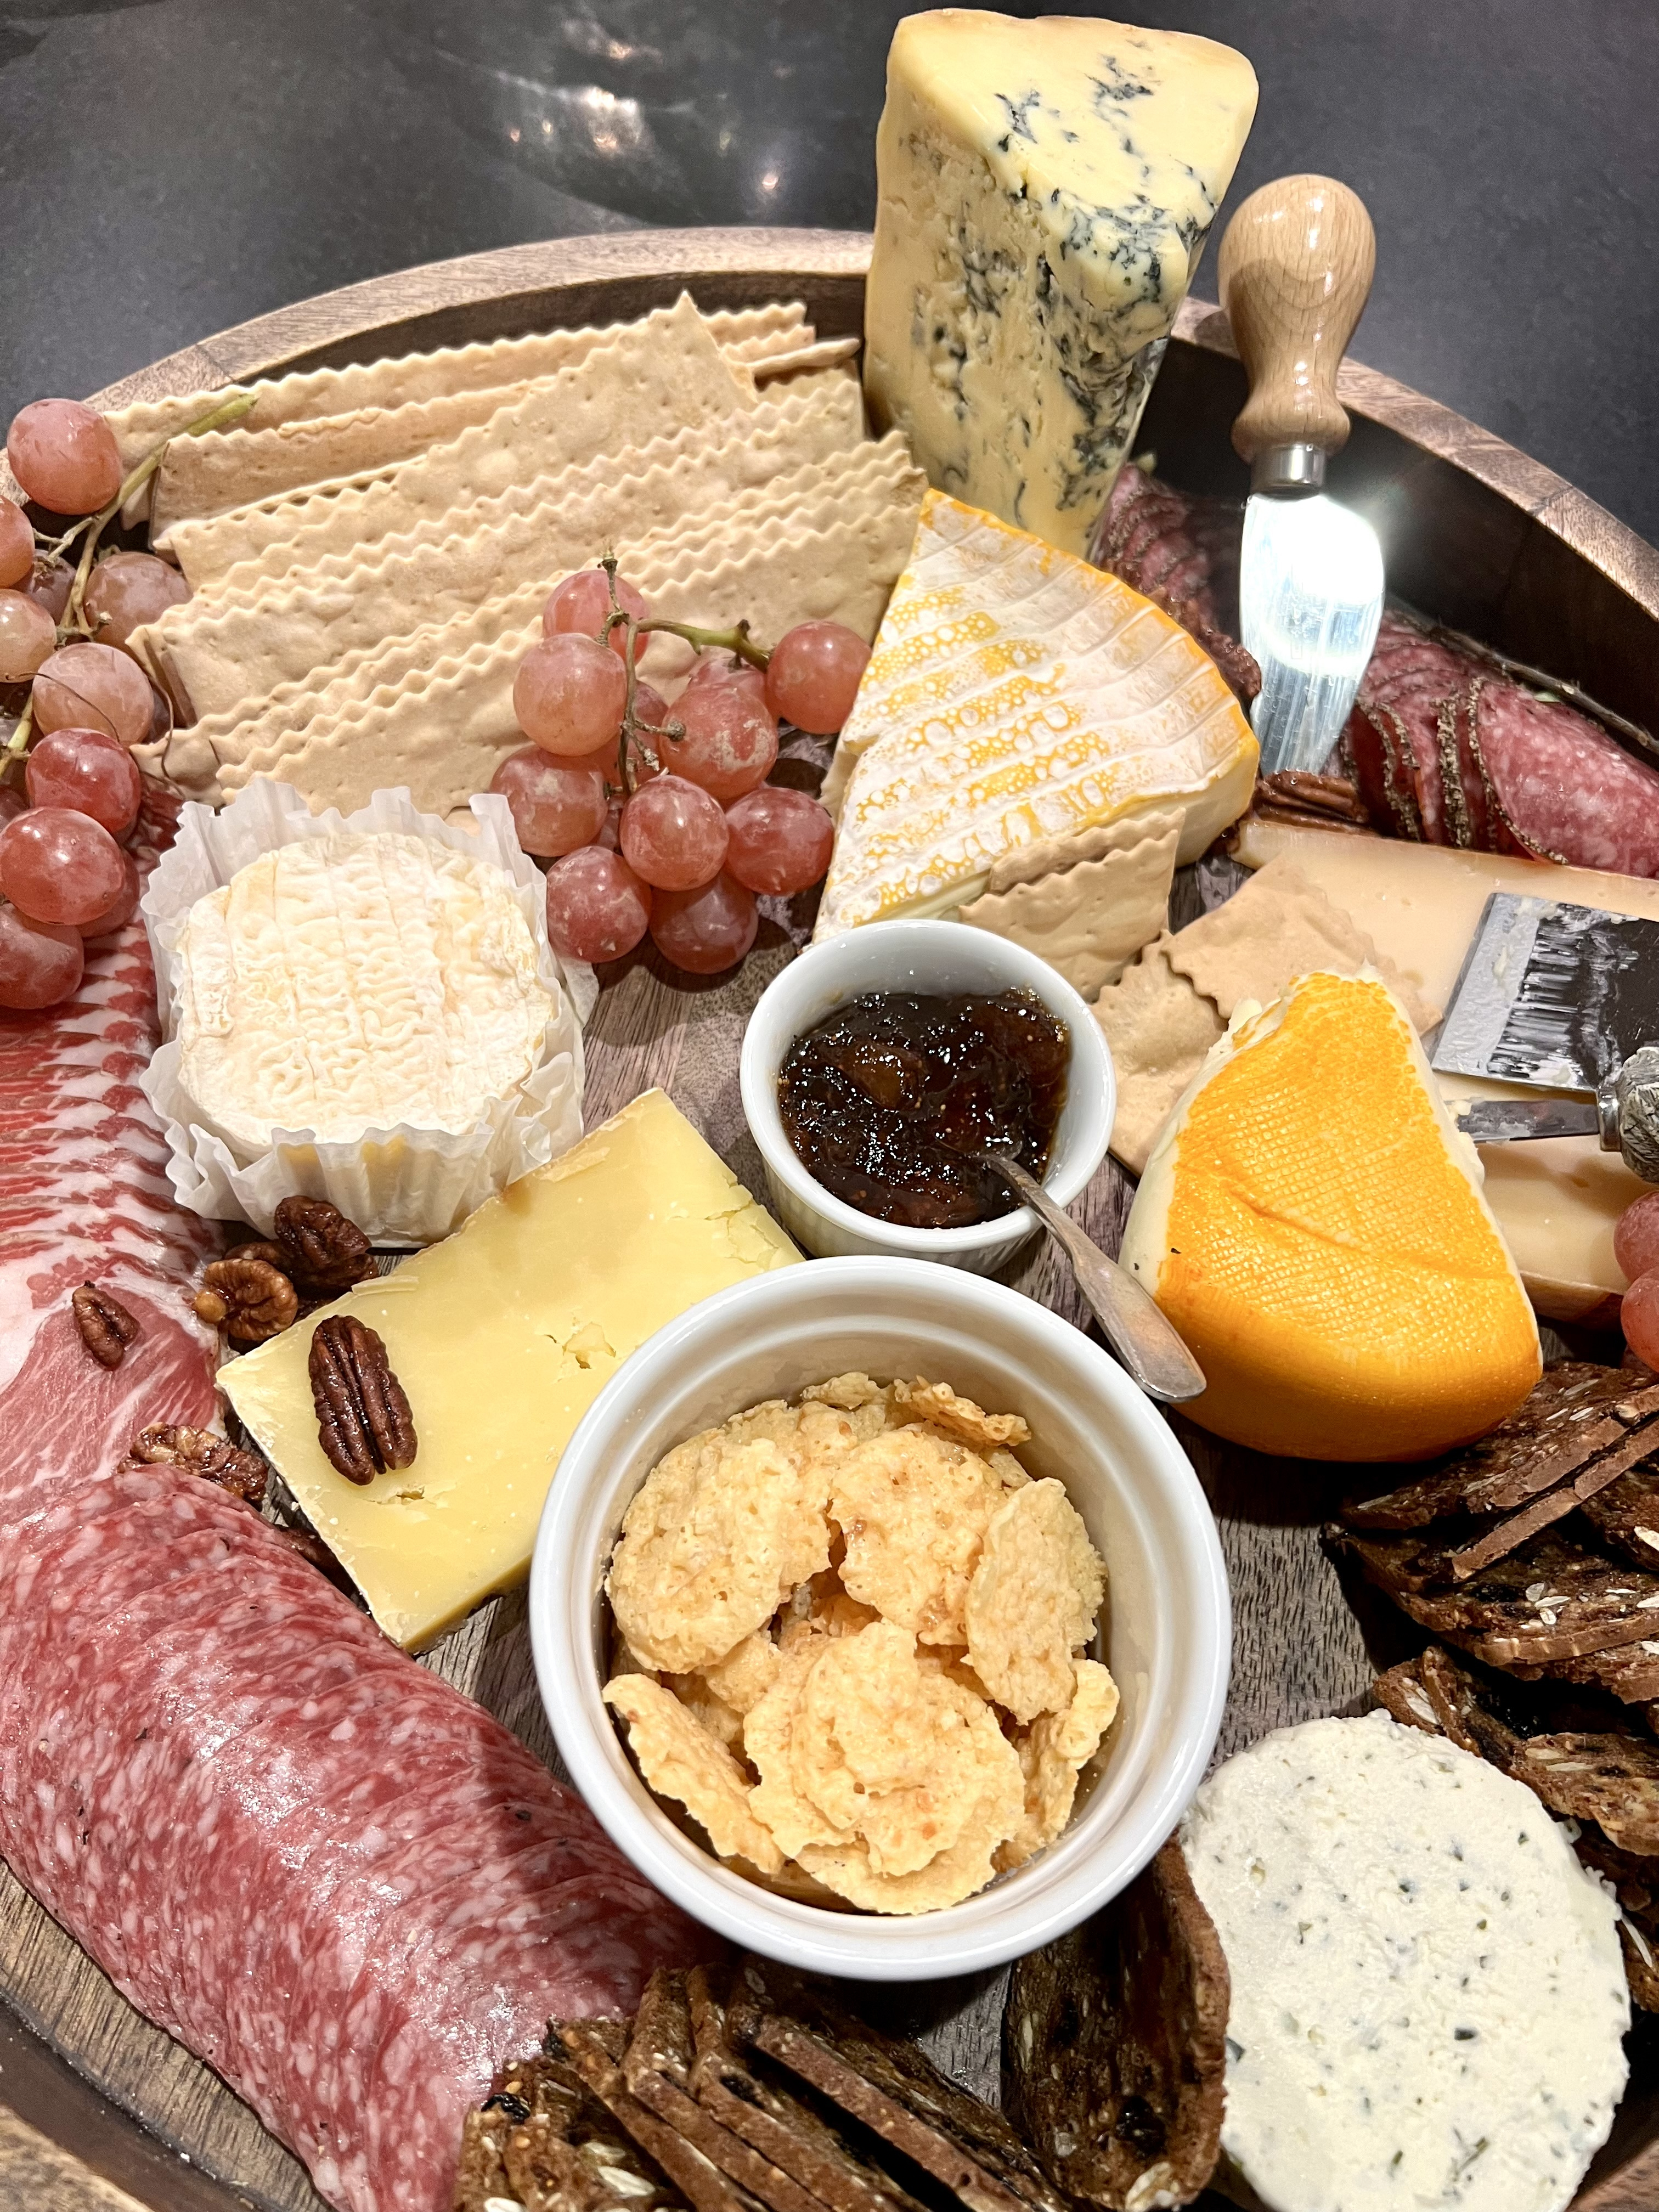 cheese board with various cheeses, crackers, nuts, and fruit atop it